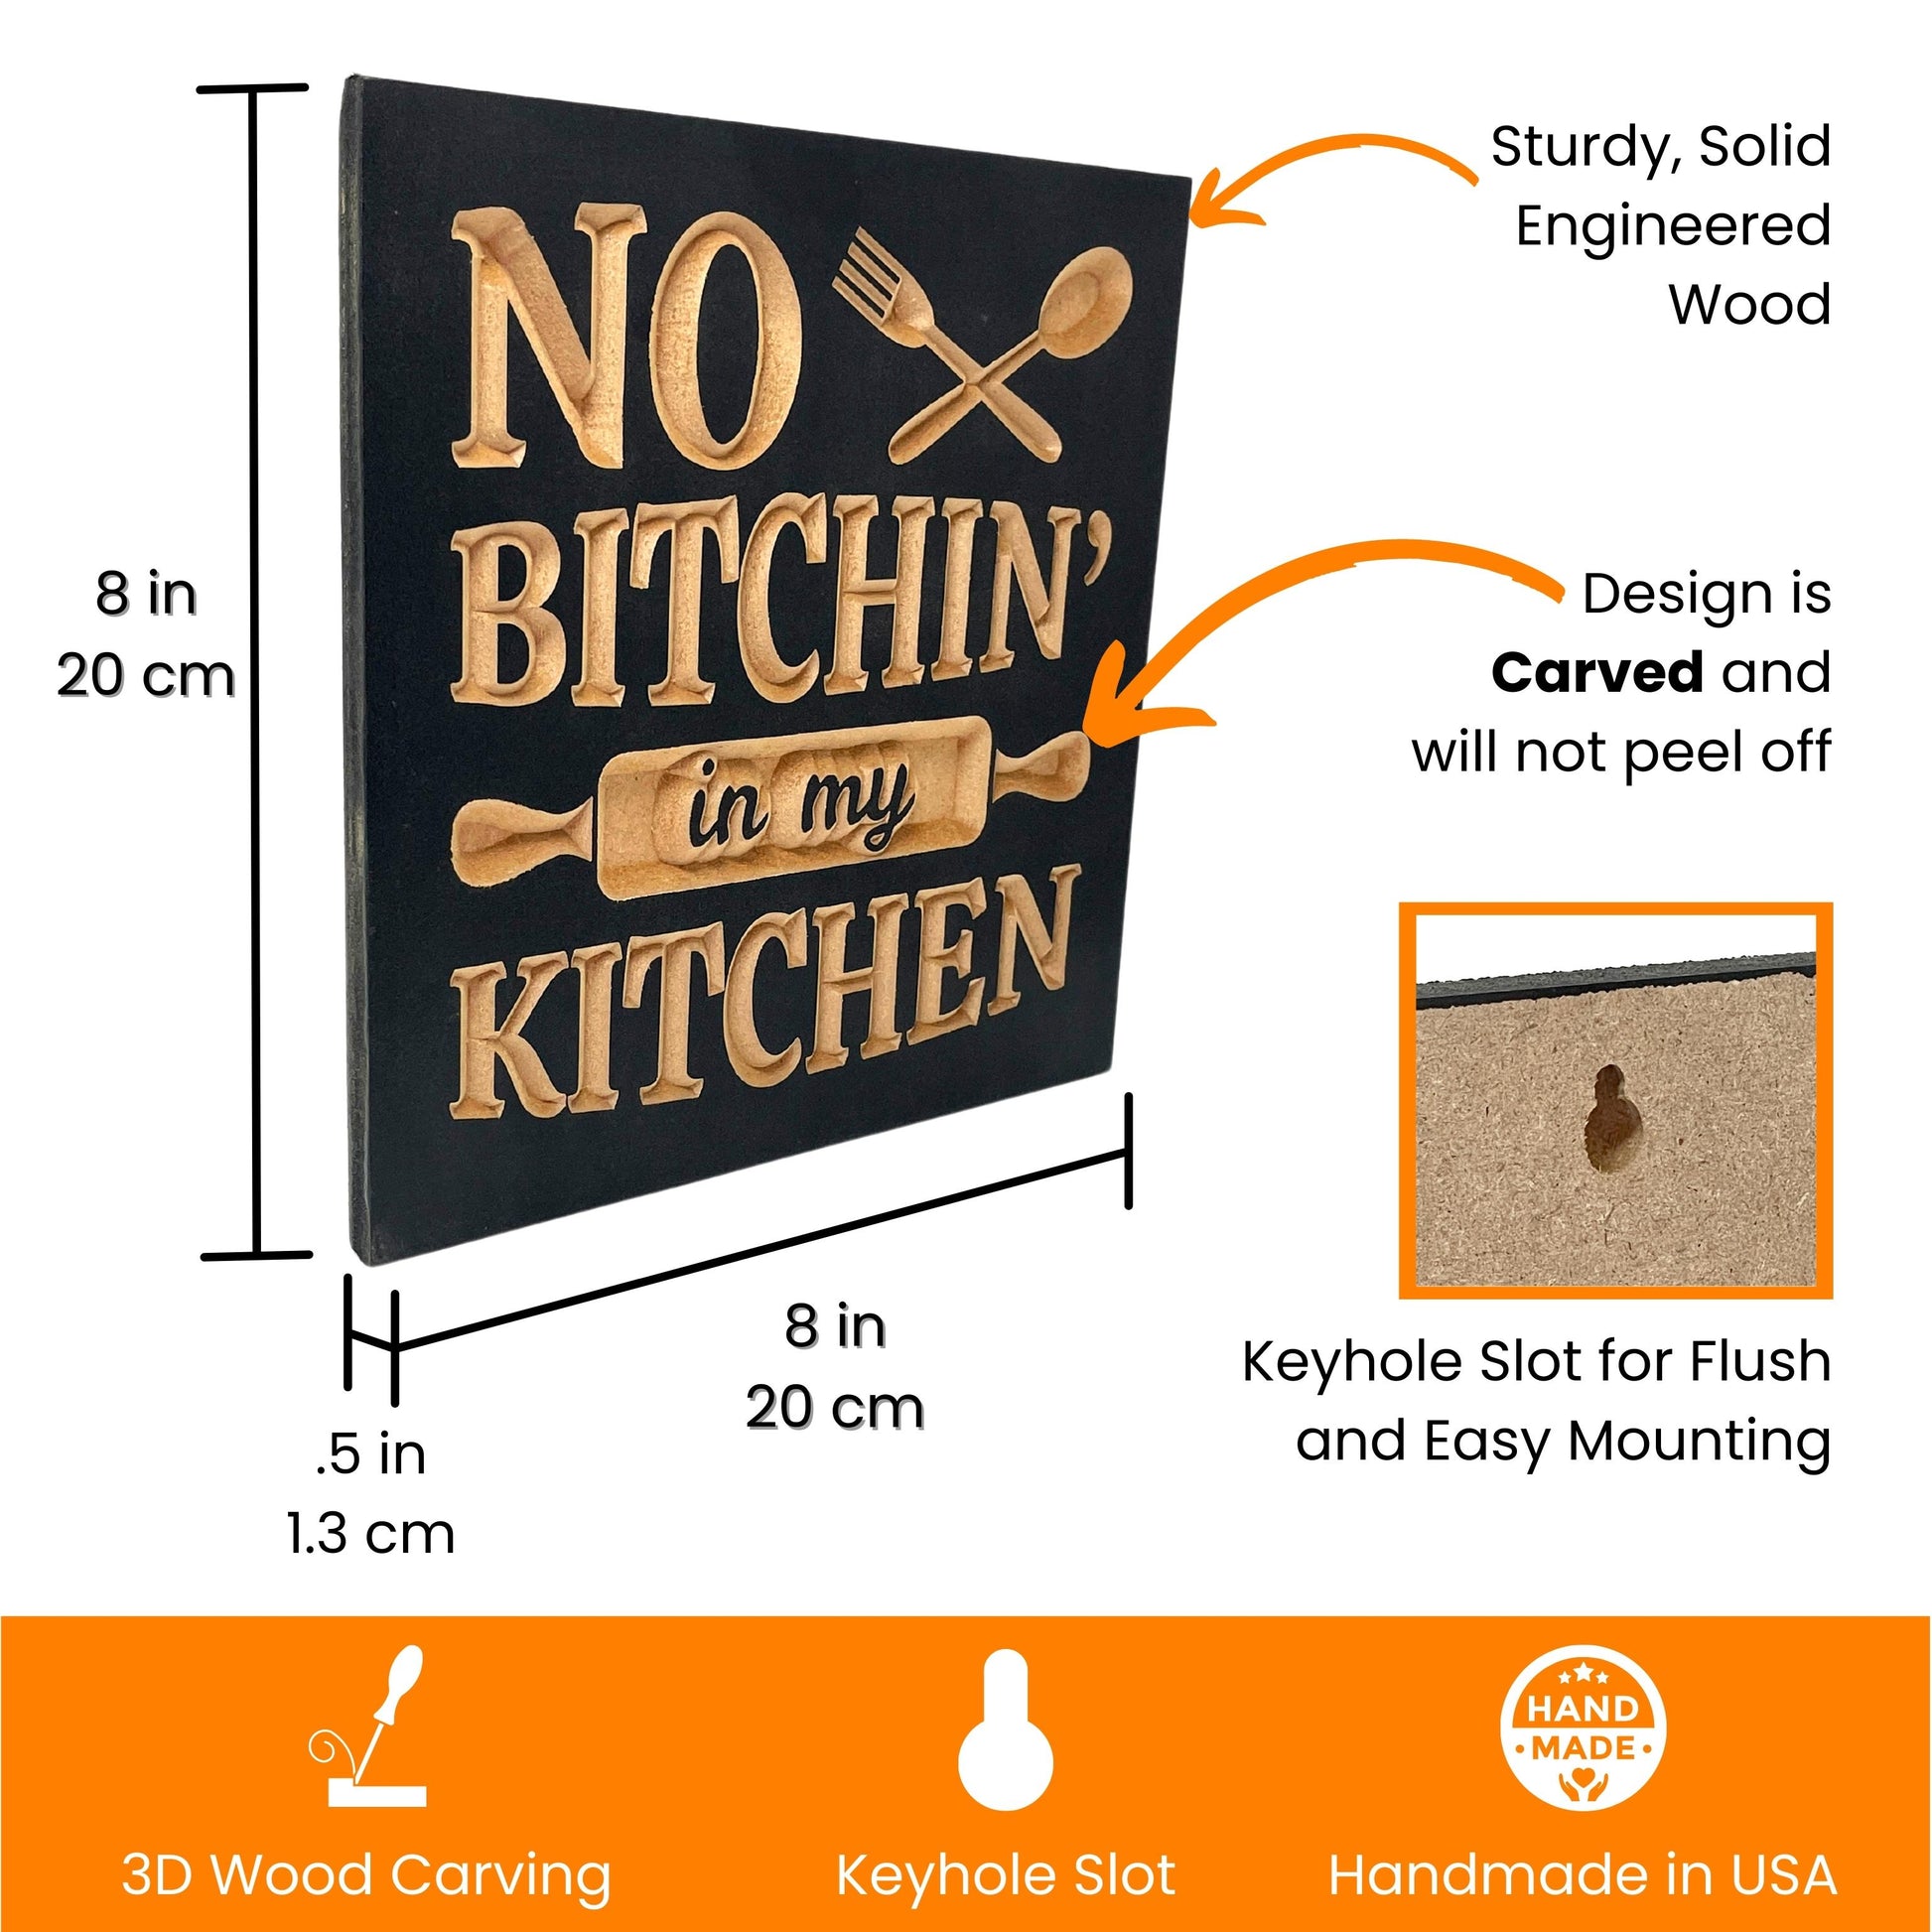 No Bitchin' in my Kitchen Product Details